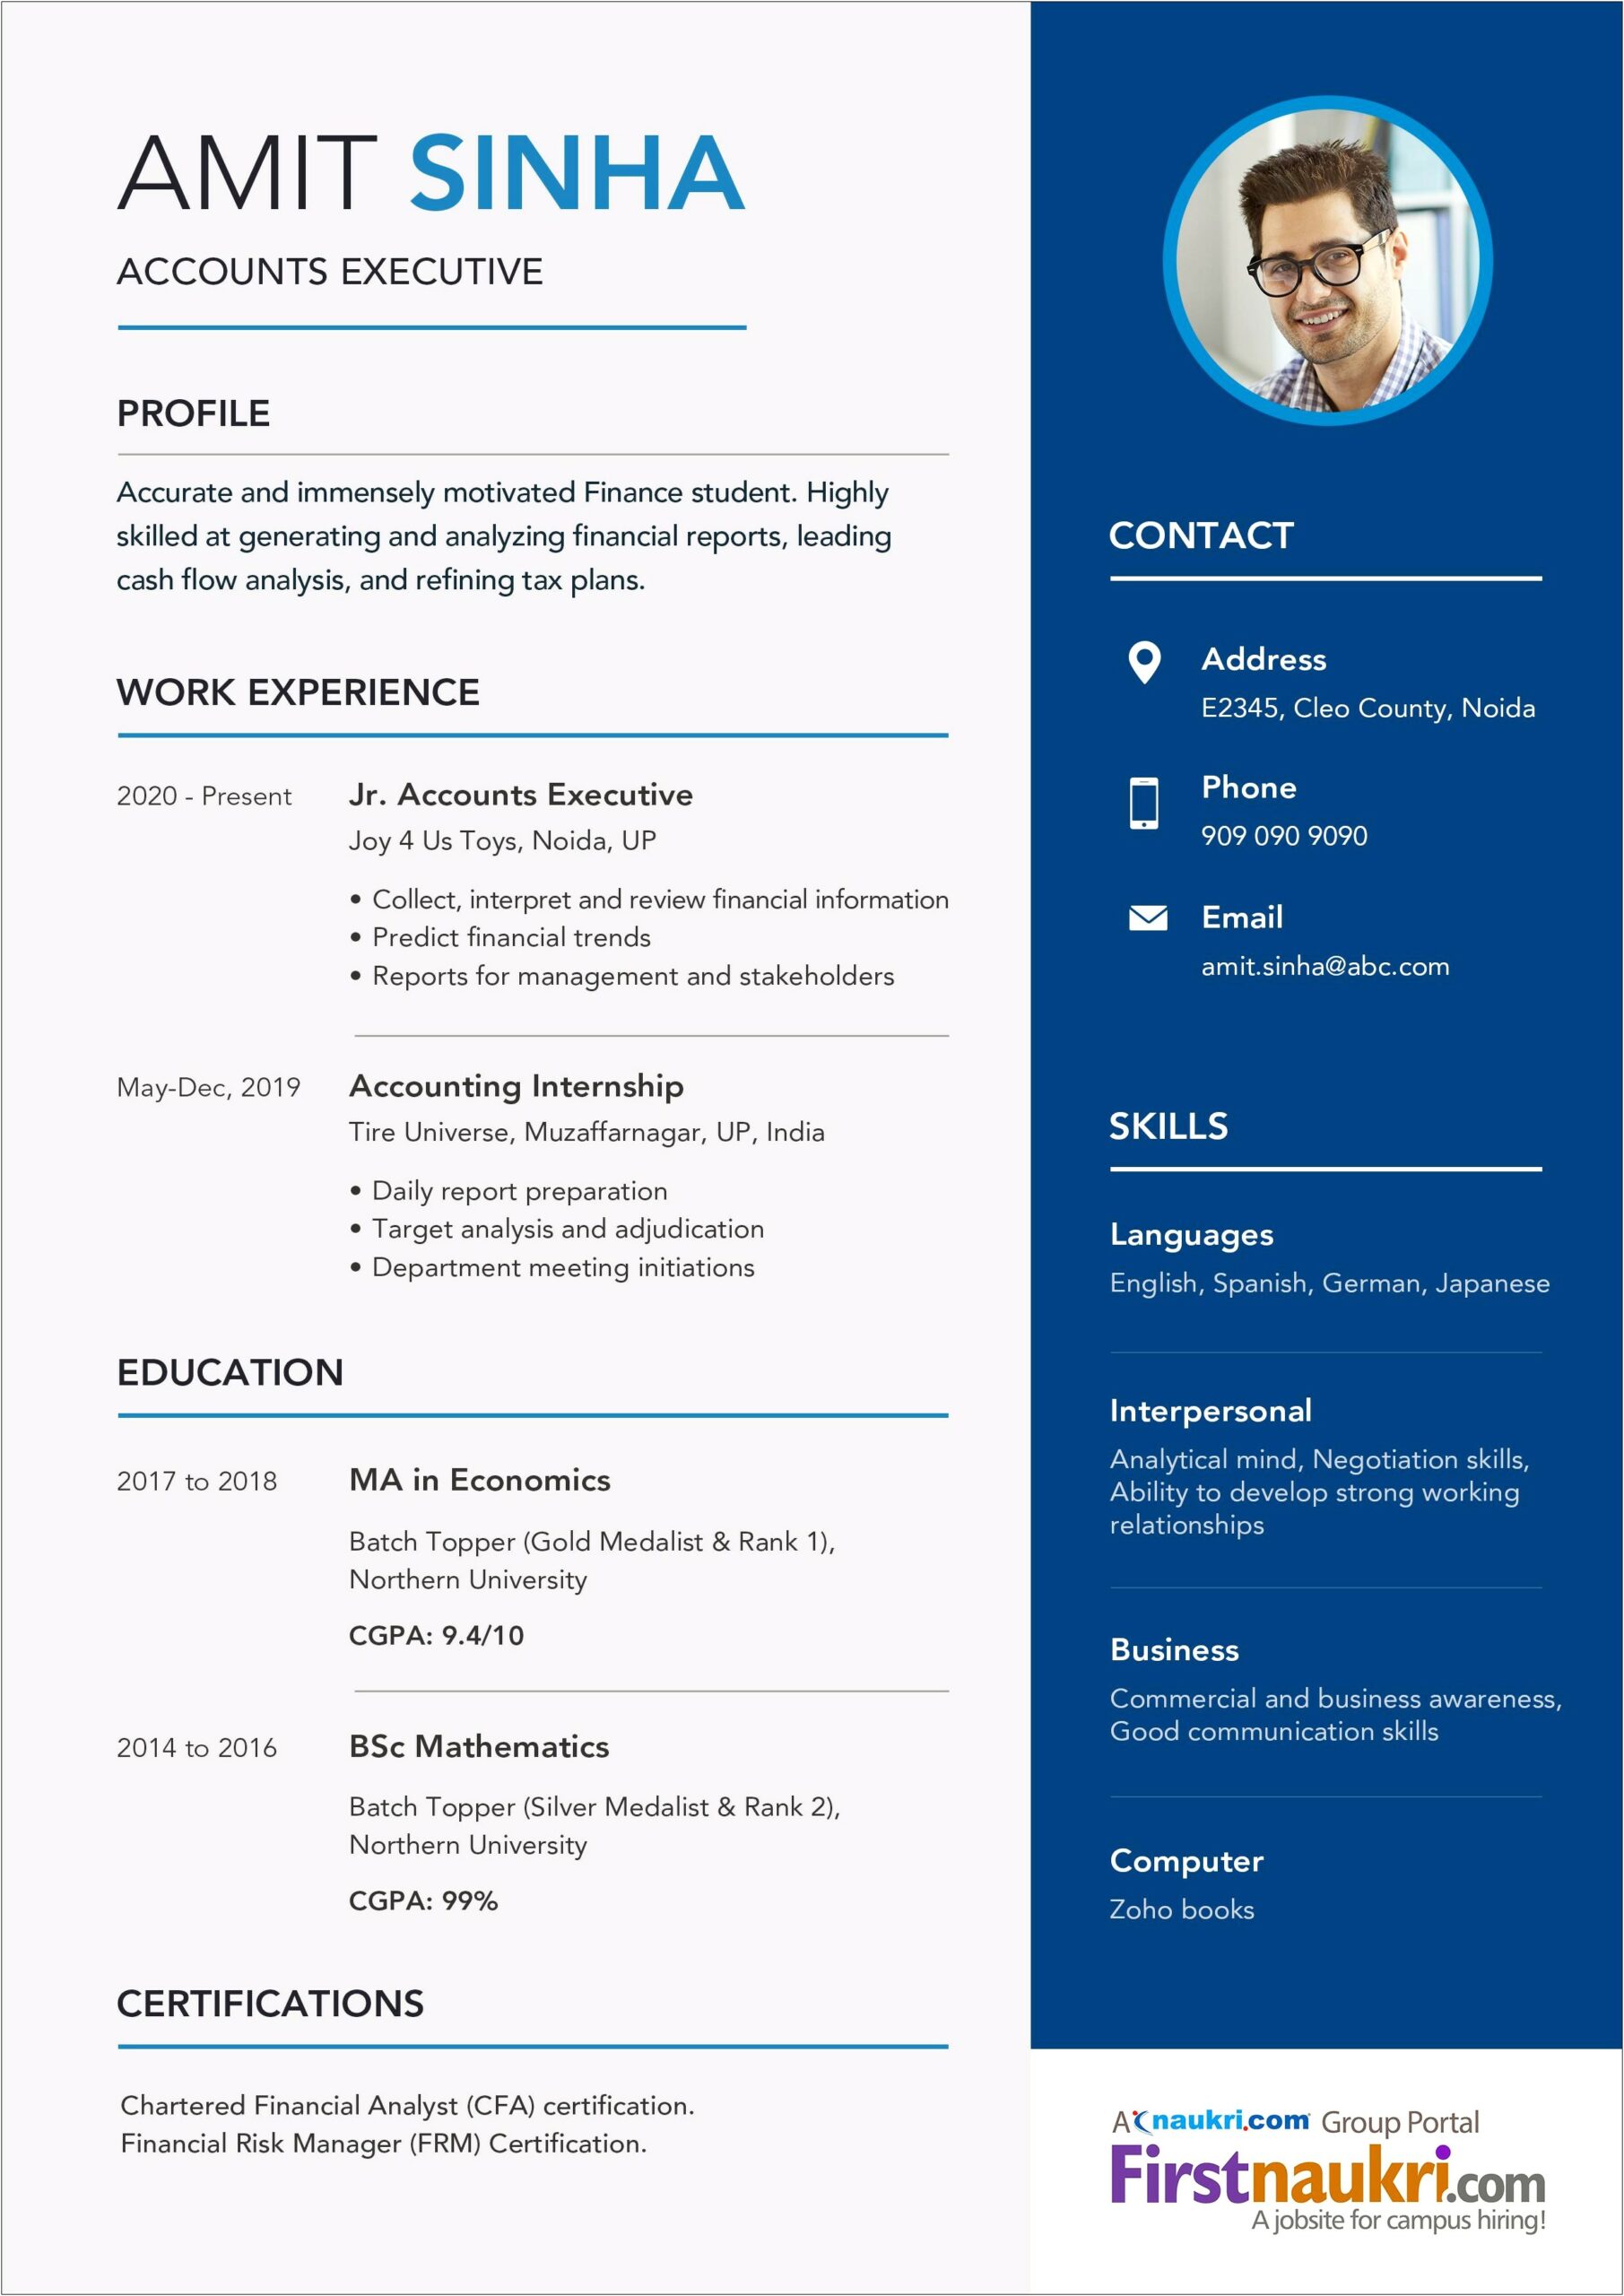 Content Writing Resume Samples For Freshers